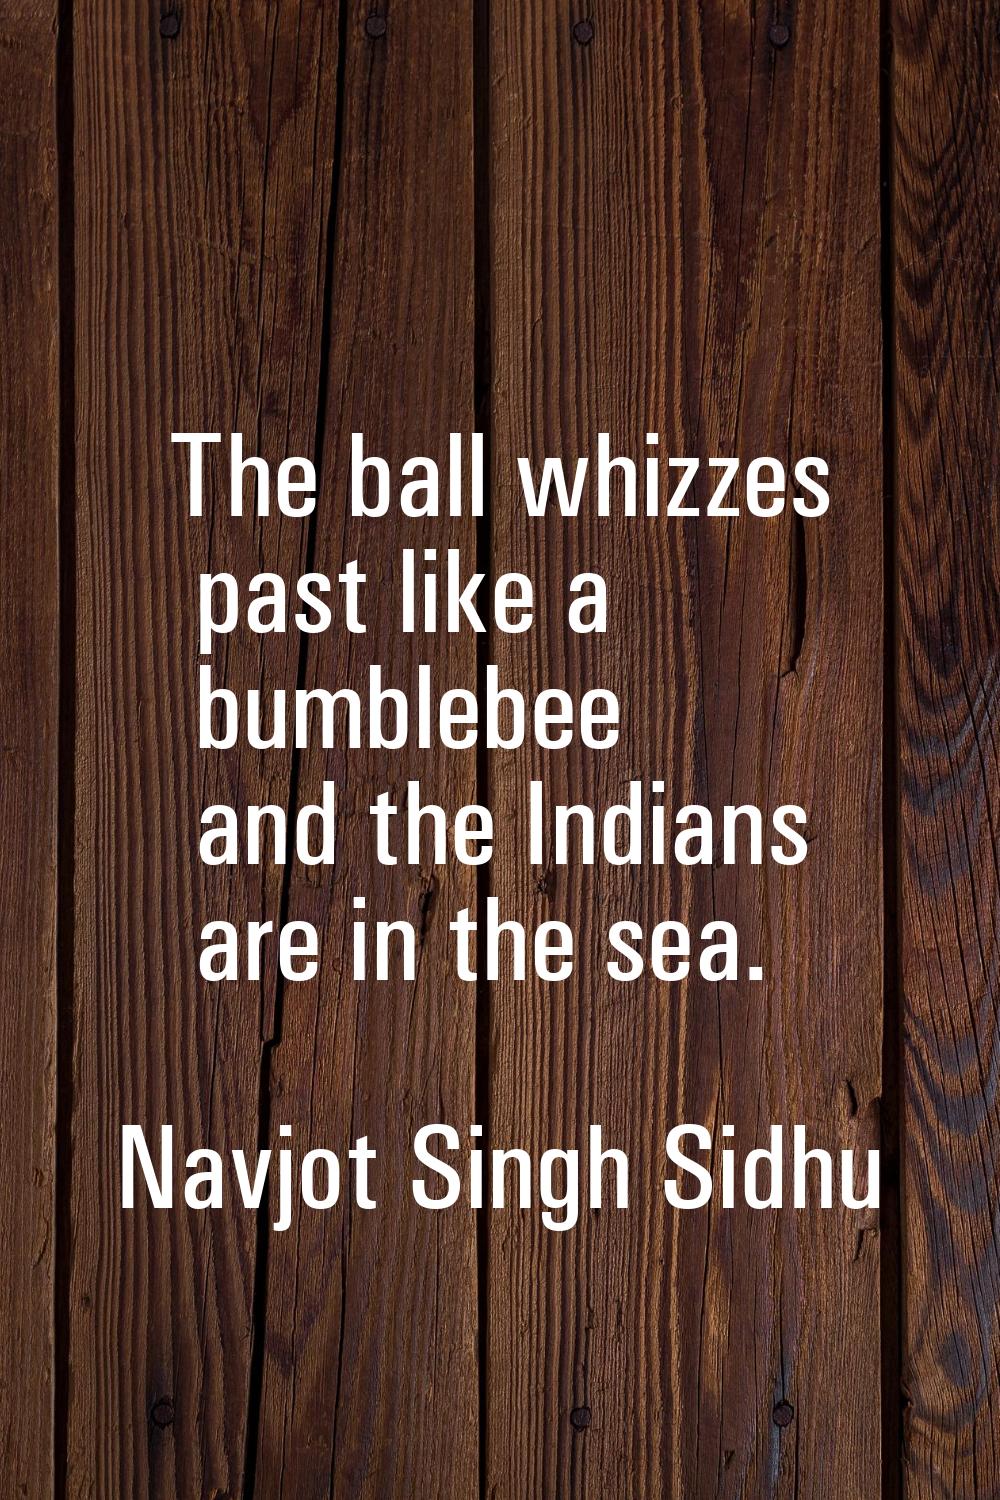 The ball whizzes past like a bumblebee and the Indians are in the sea.